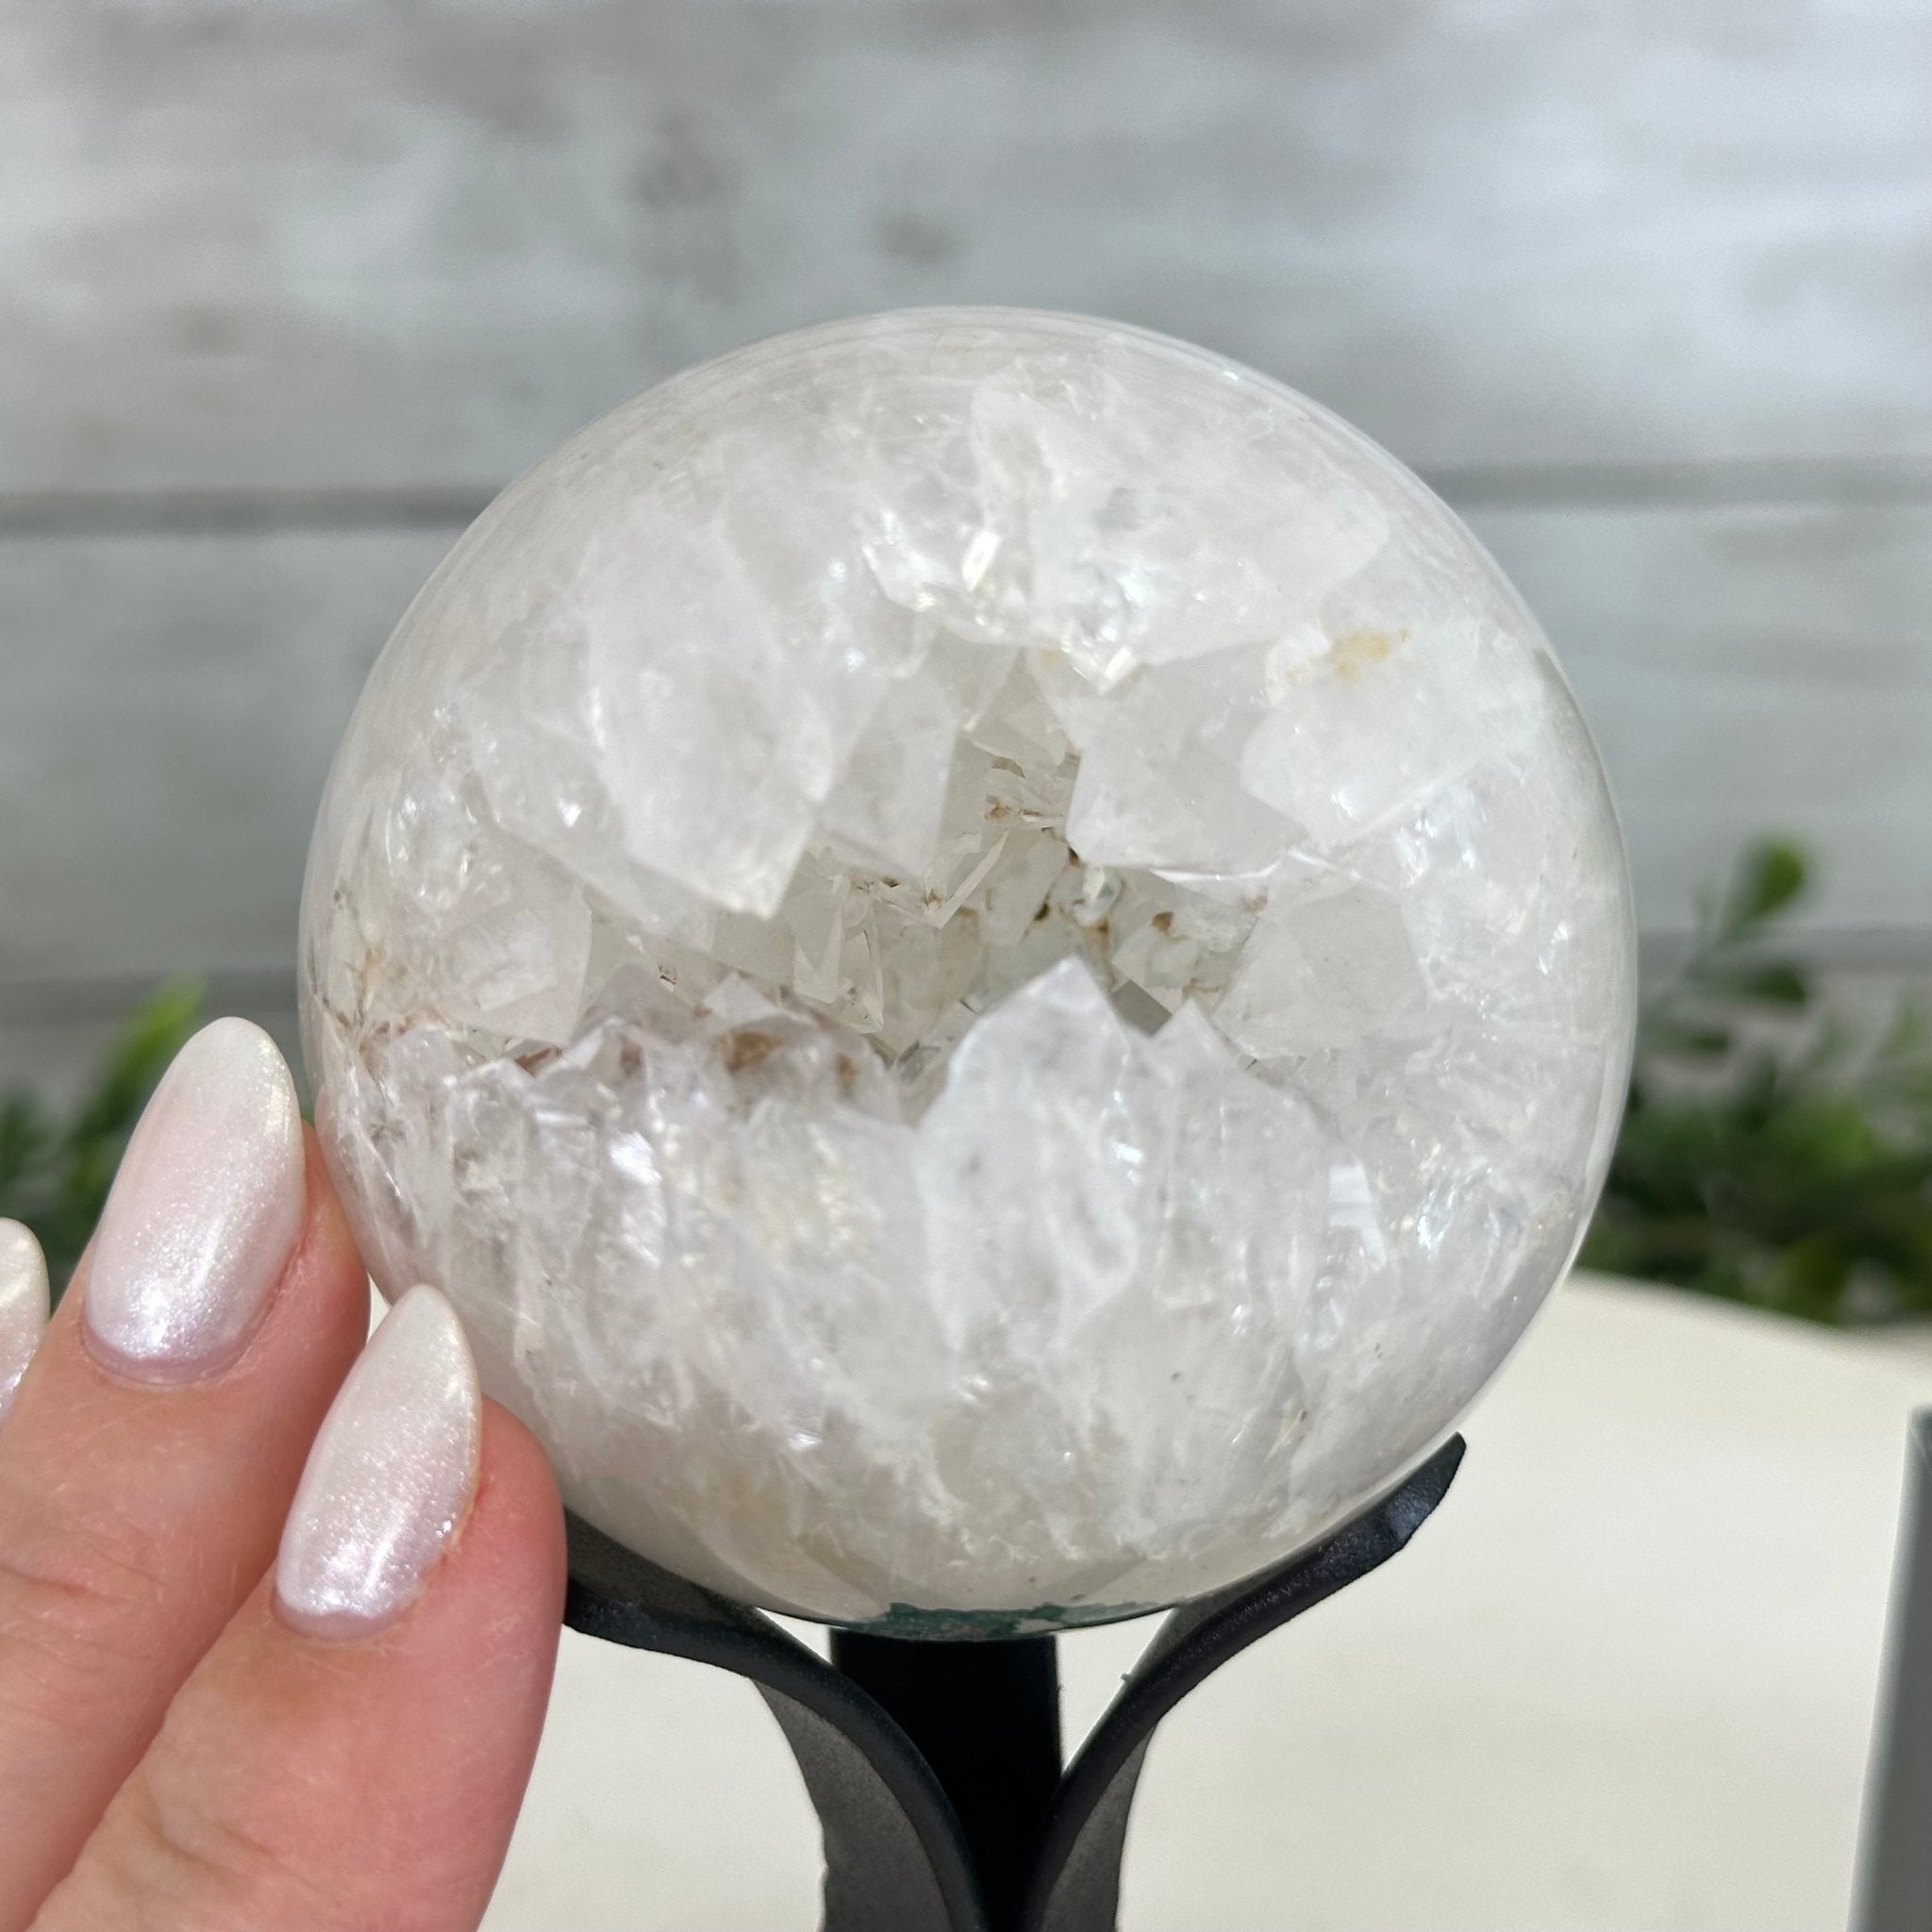 Druzy White Amethyst Sphere on a Metal Stand, 0.8 lbs & 6.2" Tall #5630-0032 - Brazil GemsBrazil GemsDruzy White Amethyst Sphere on a Metal Stand, 0.8 lbs & 6.2" Tall #5630-0032Spheres5630-0032